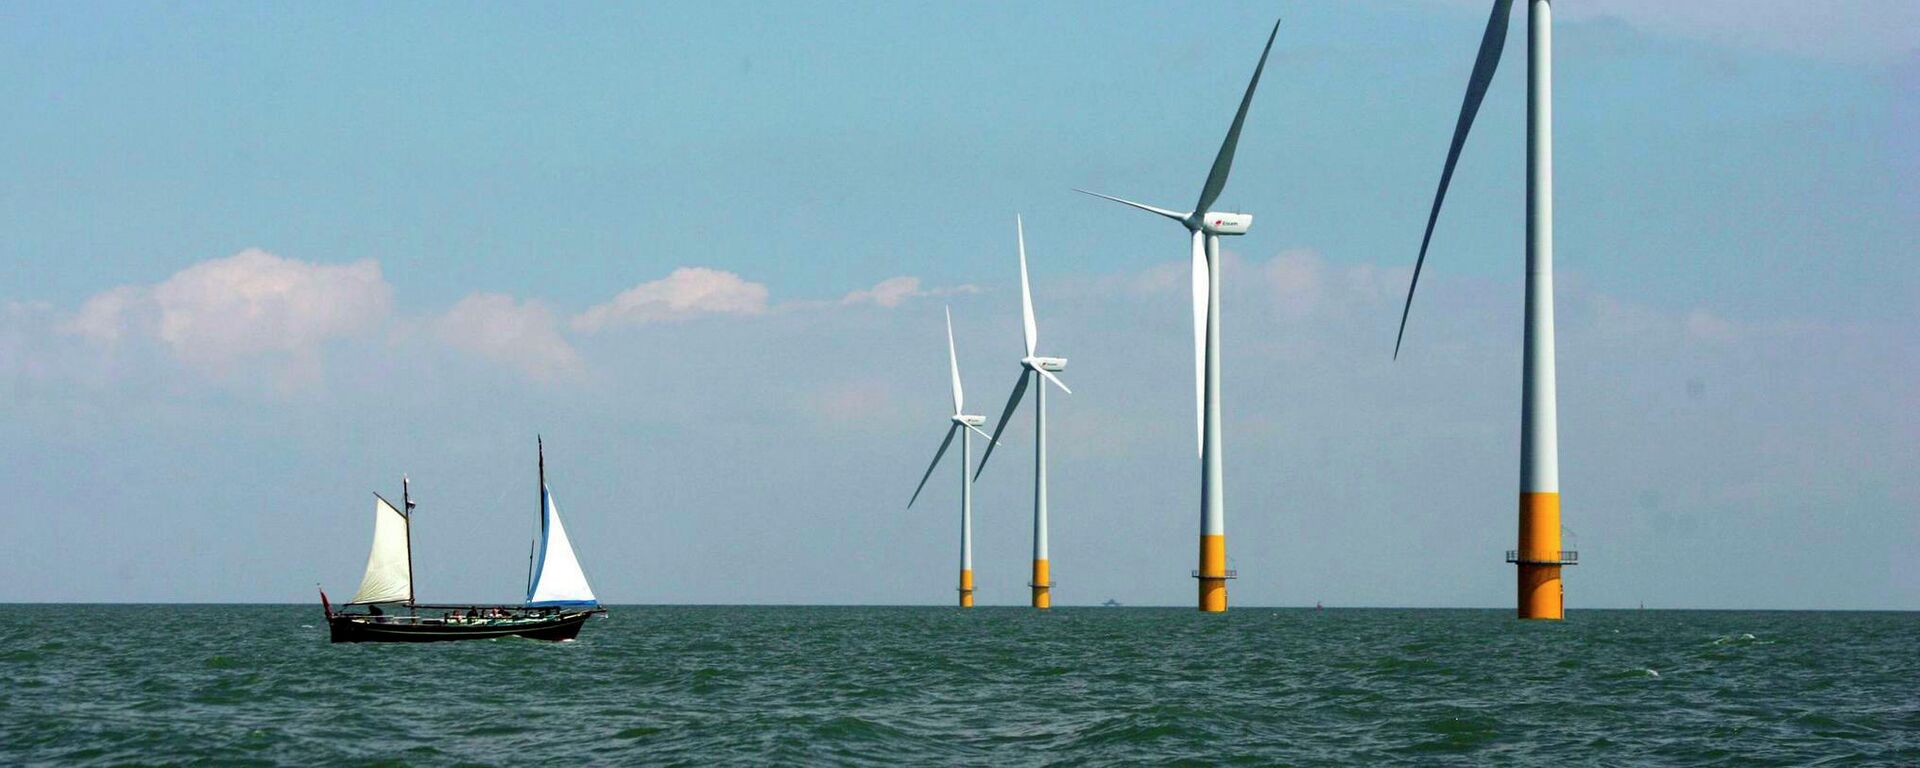 FILE - In this July 11, 2006 file photo, a vessel sails towards a wind farm off the coast of Whitstable on the north Kent coast in southeastern England - Sputnik International, 1920, 20.10.2021